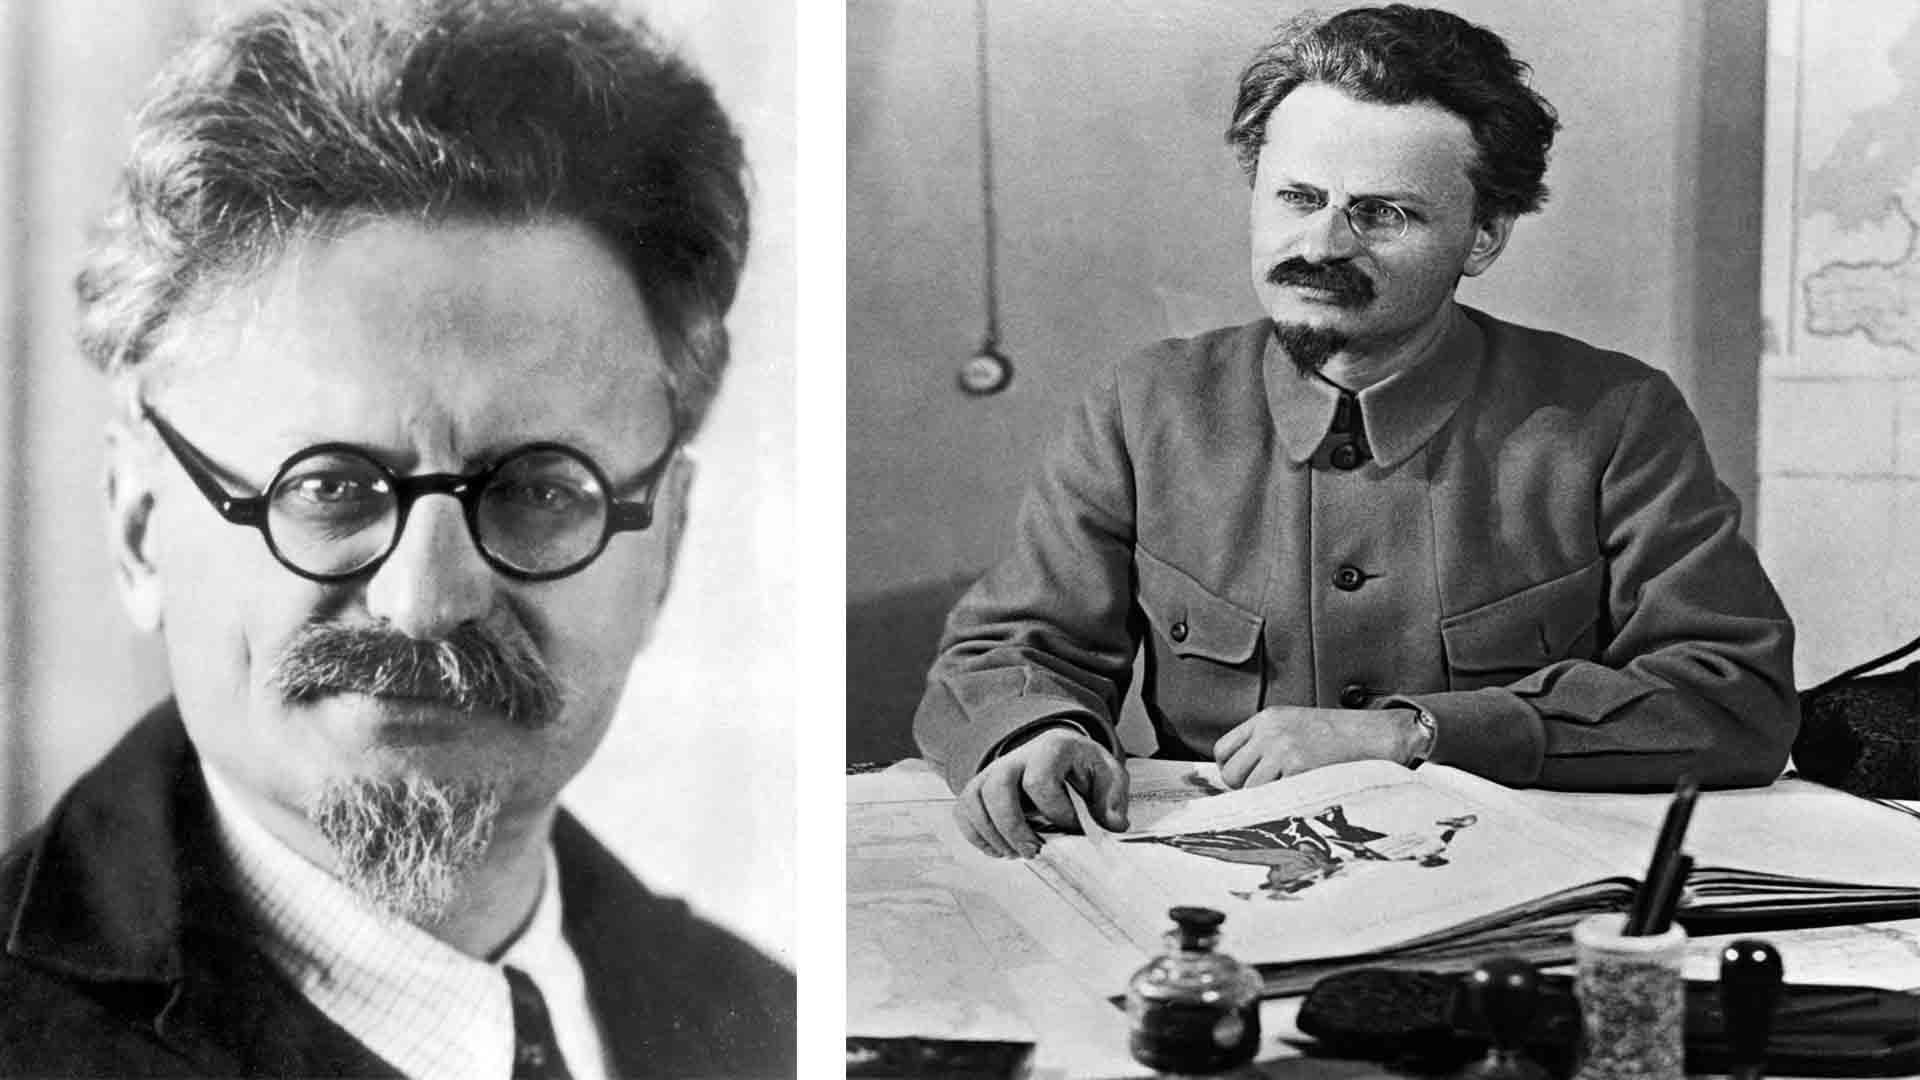 42 interesting facts about Leon Trotsky